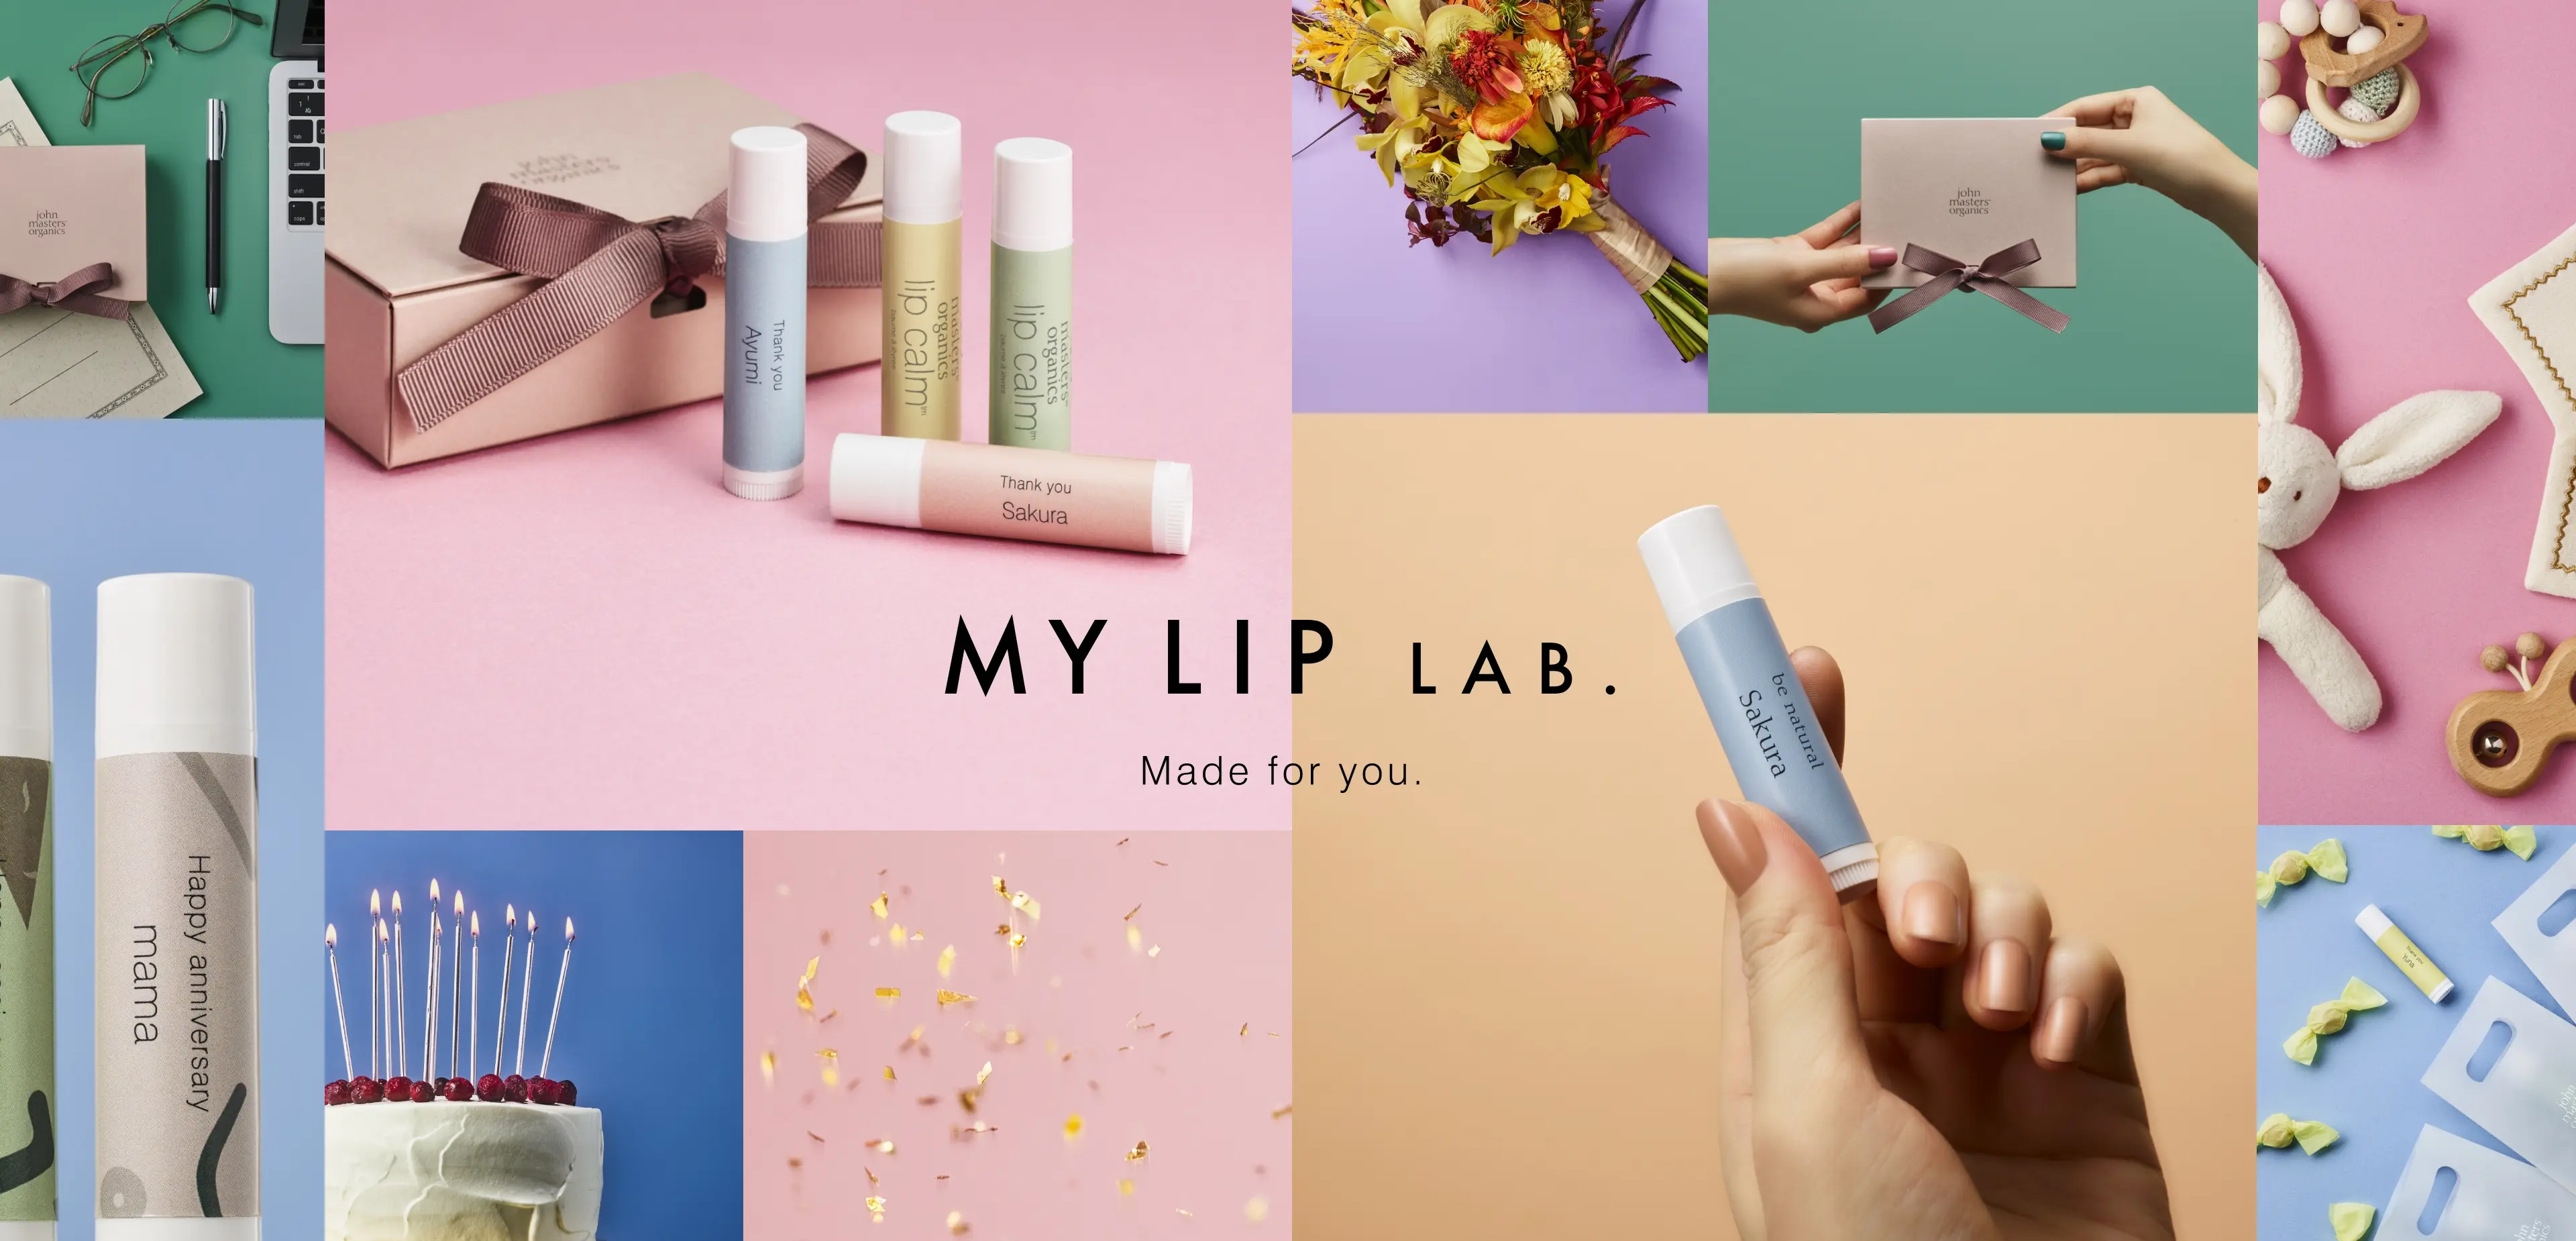 MY LIP LAB Made for you.